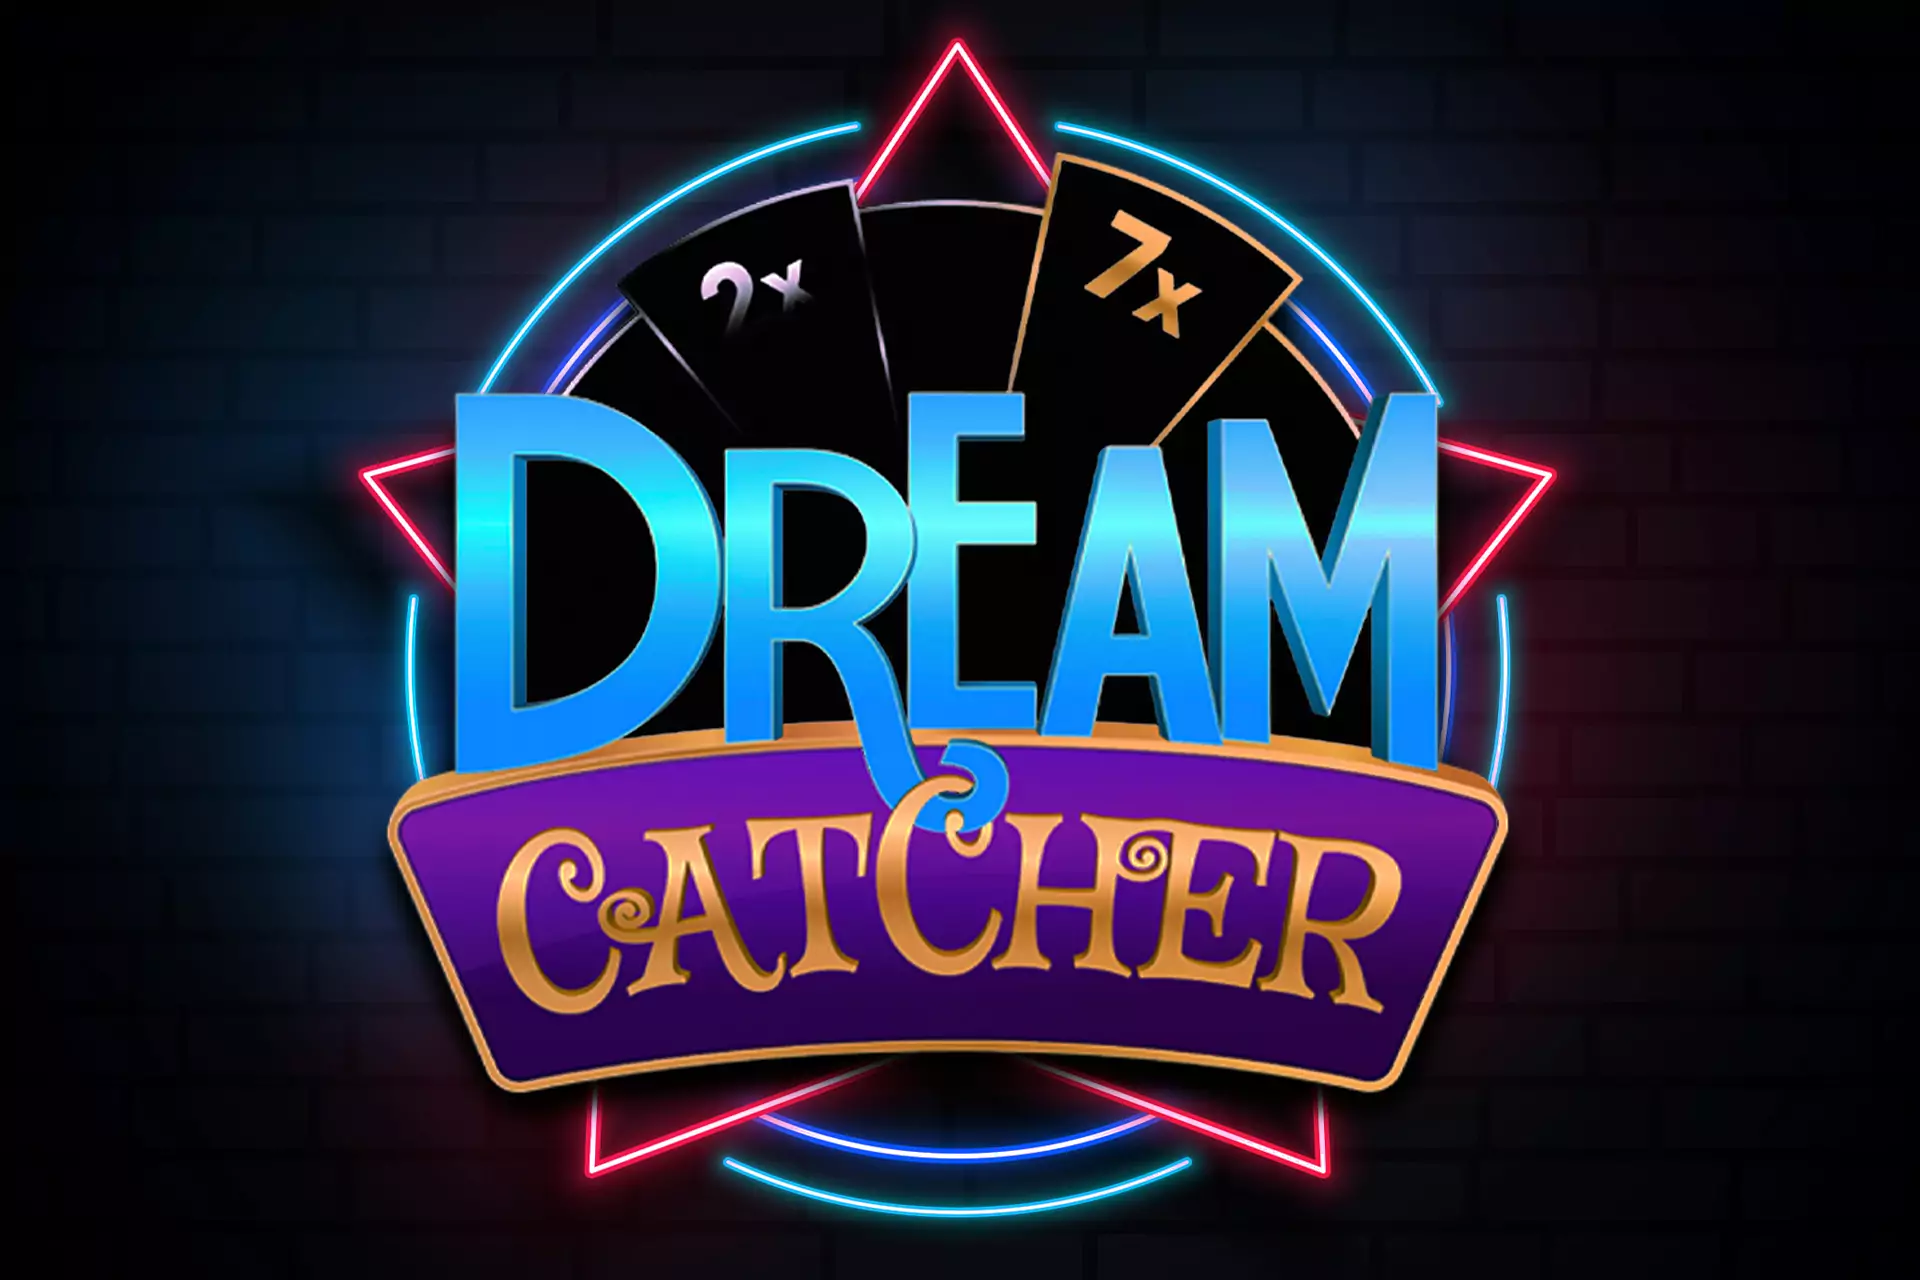 Dream Catcher is another popular among users from India fortune wheel game.